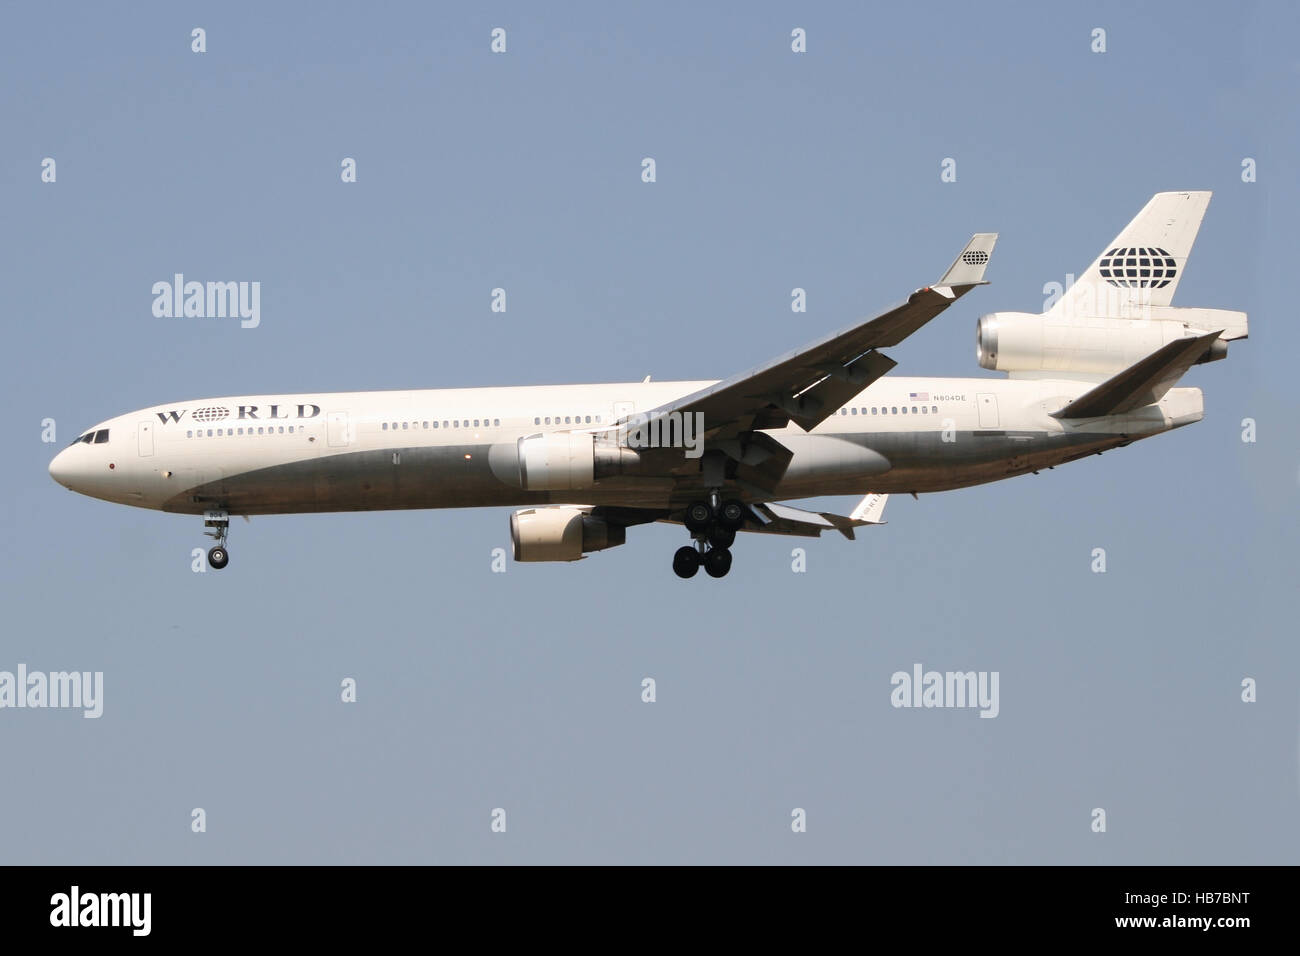 Ramstein/Germany September12, 2012: MD11 from World Cargo at ramstein Airport. Stock Photo